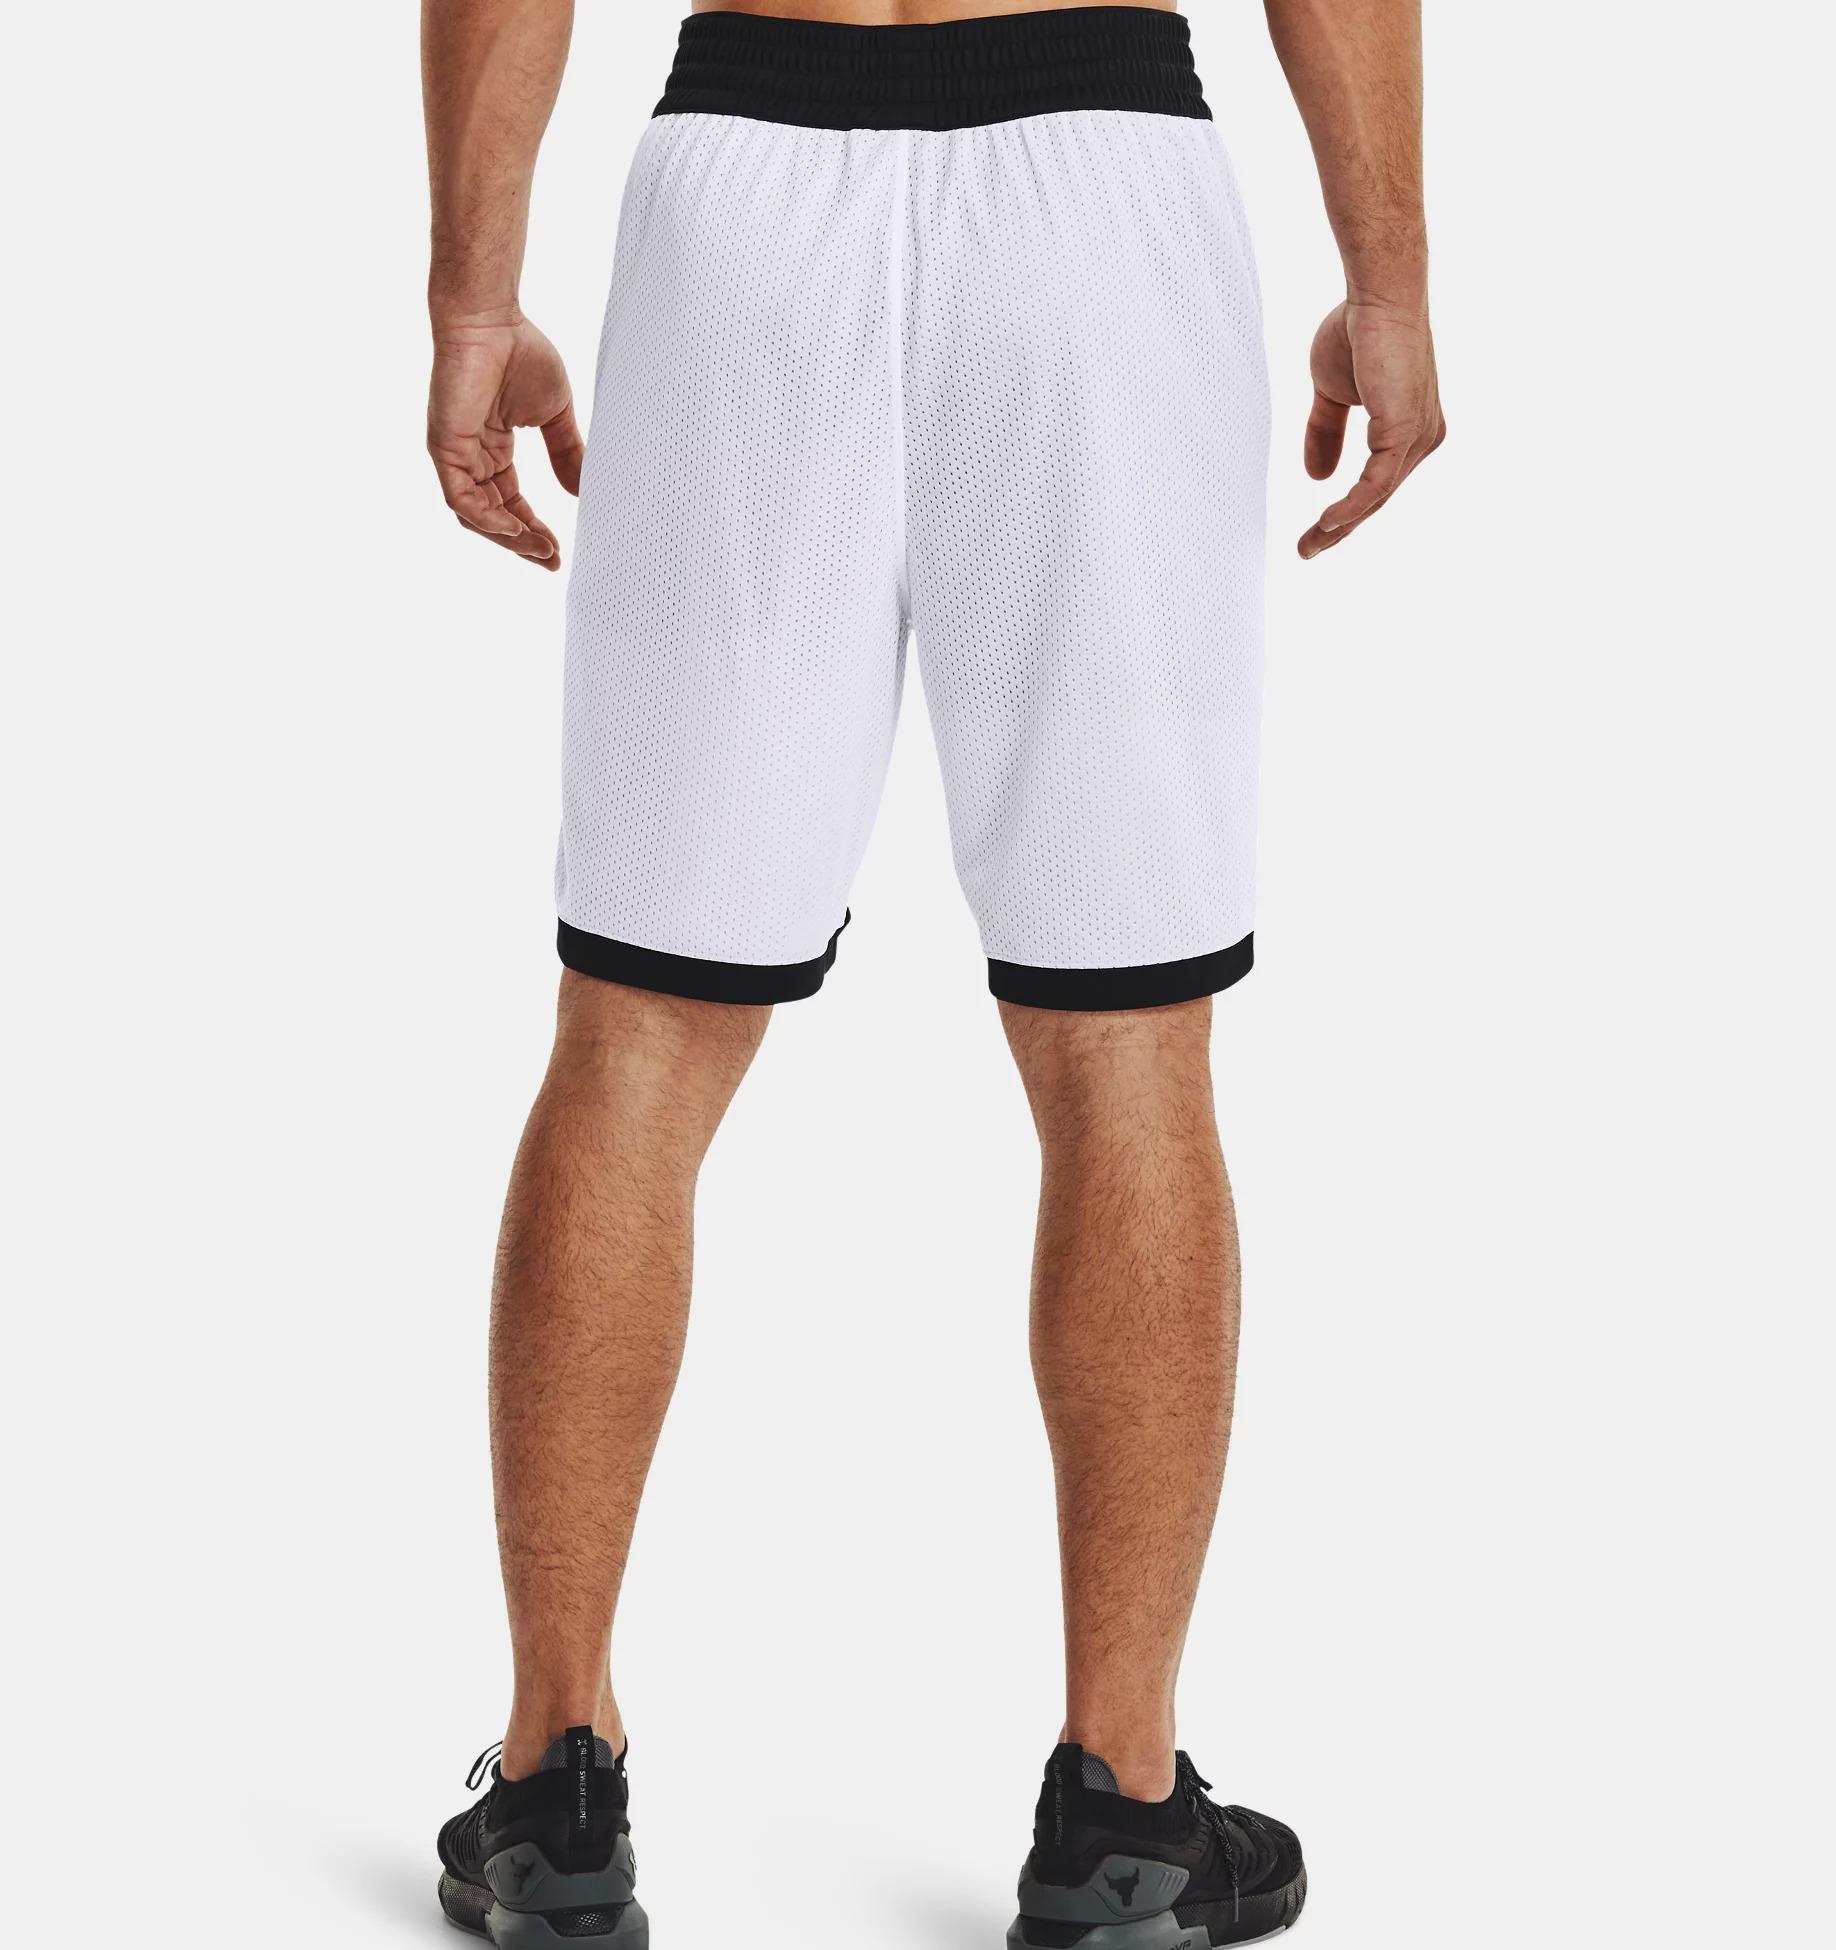 Quần ngắn thể thao nam Under Armour Project Rock Mesh - 1361618-100